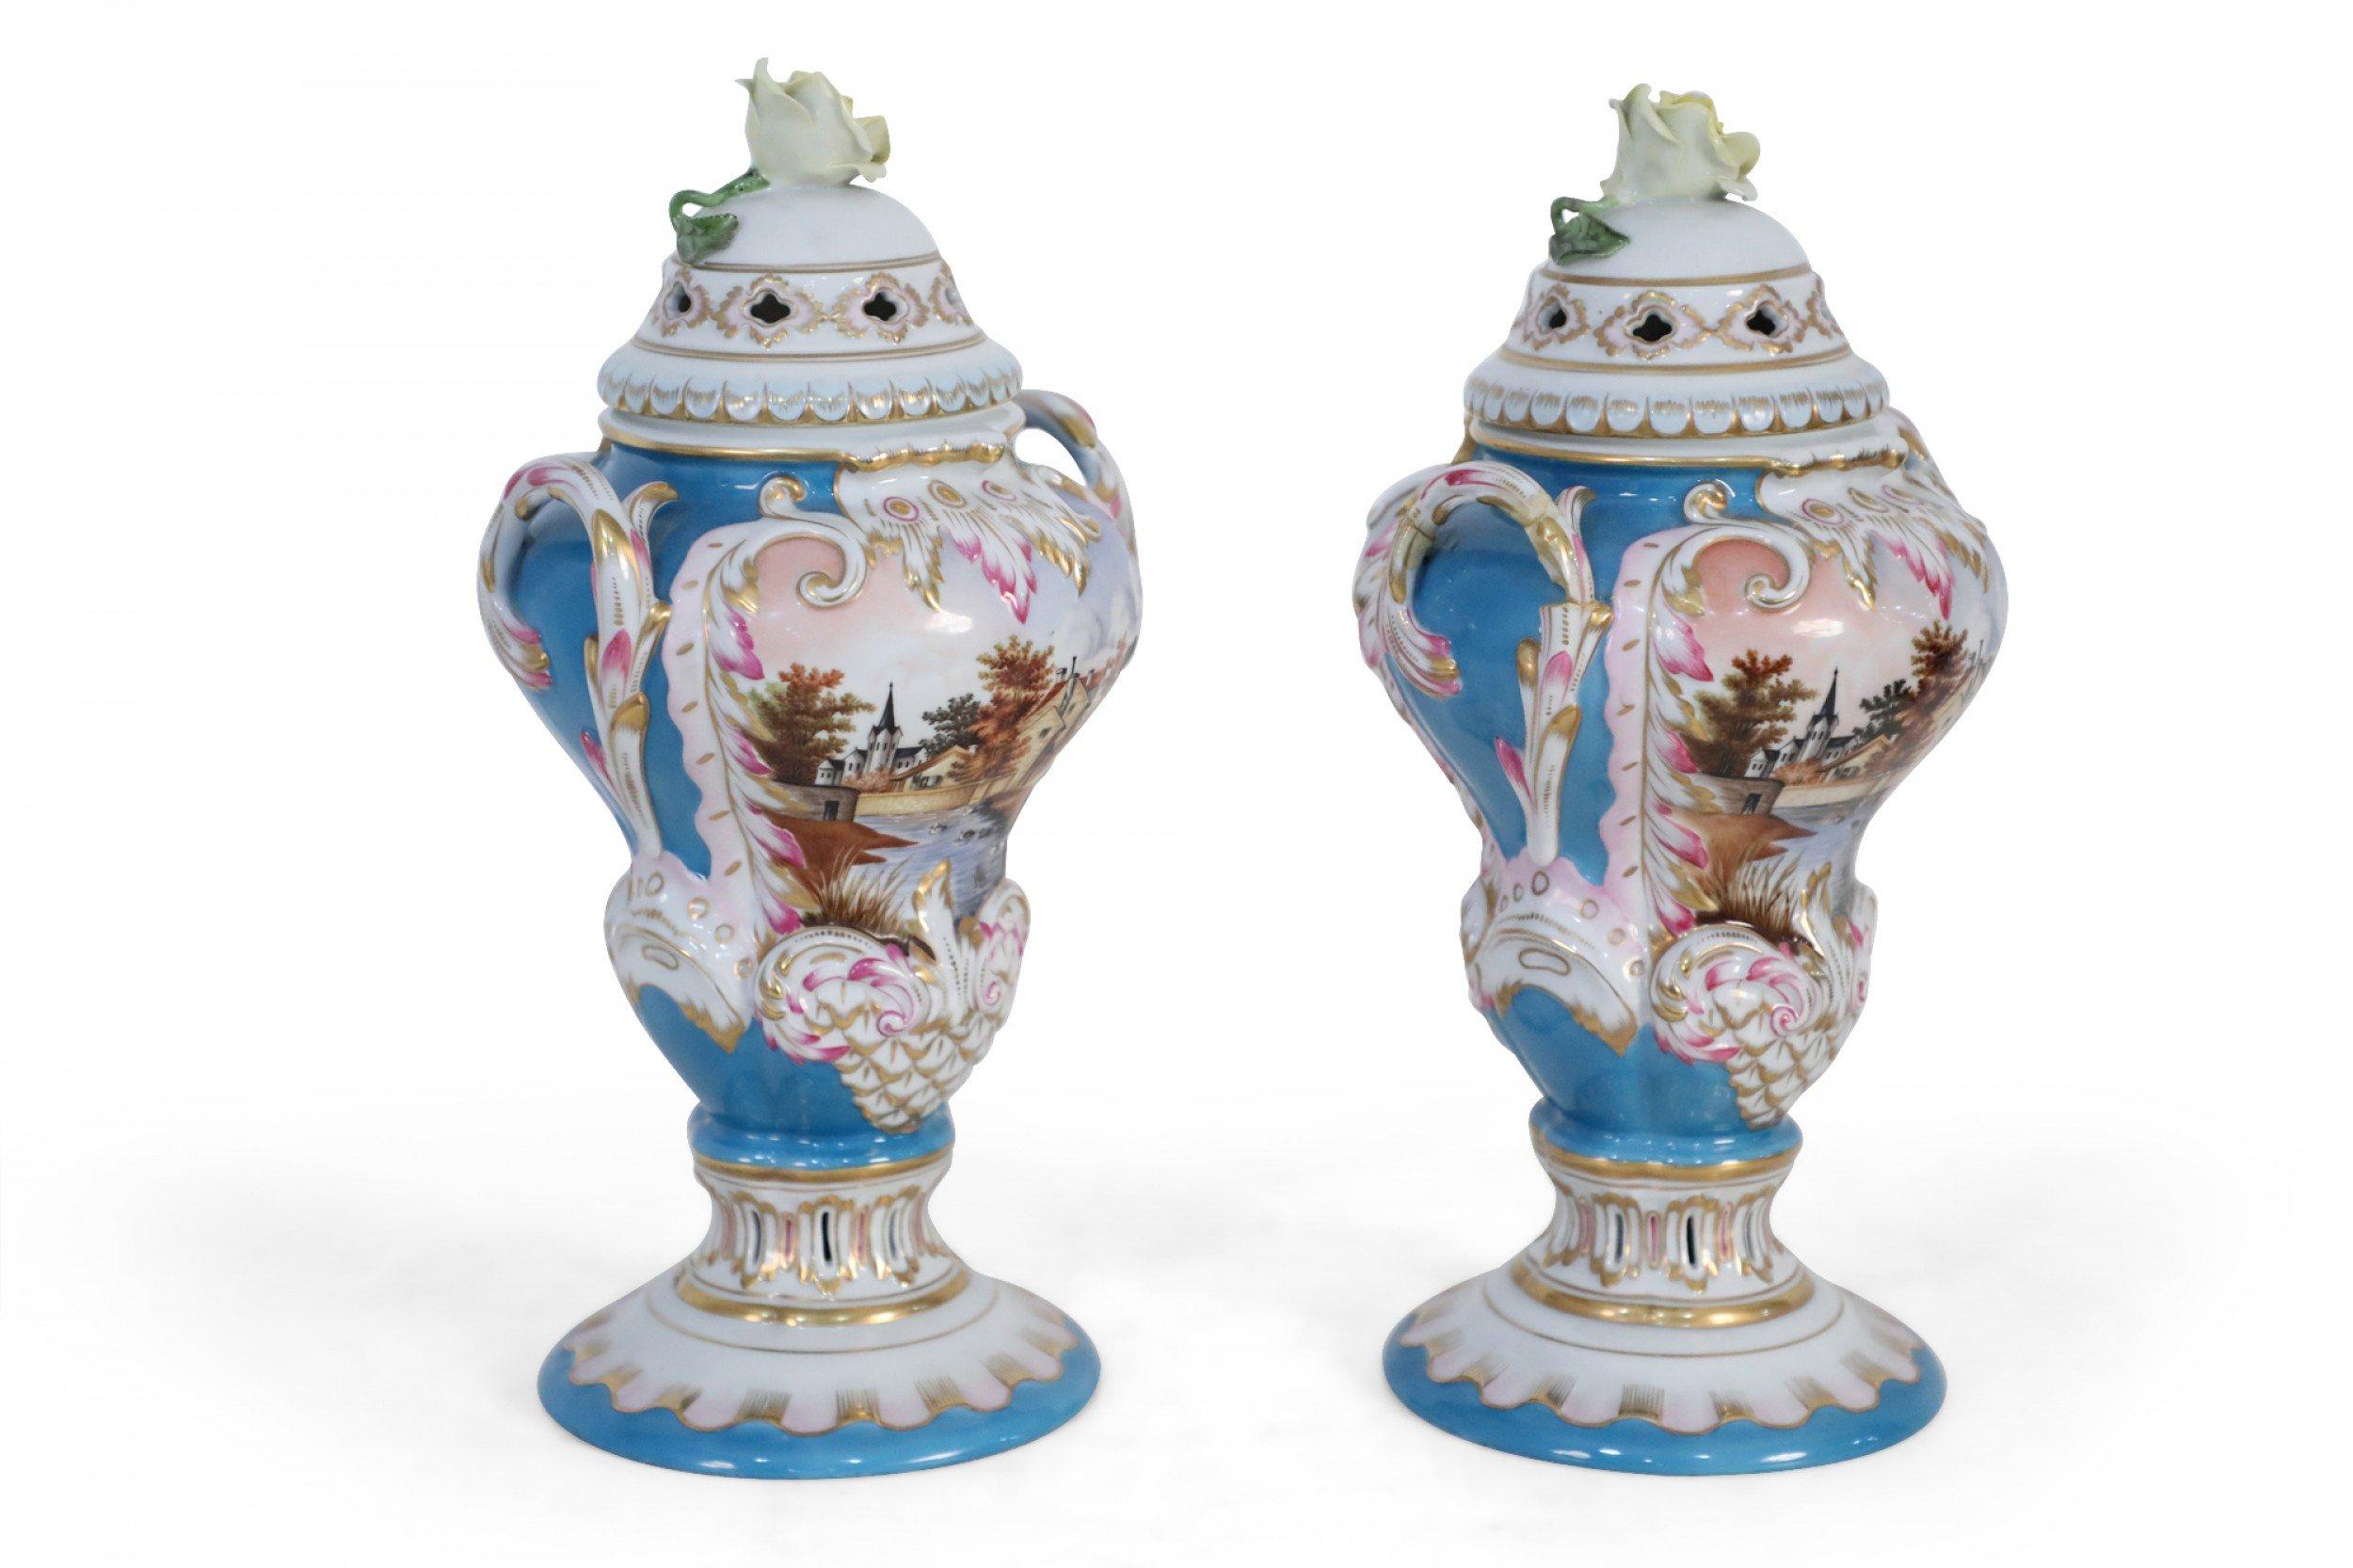 Pair of Herend Hungarian Blue Decorated and Lidded Porcelain Urns In Good Condition For Sale In New York, NY